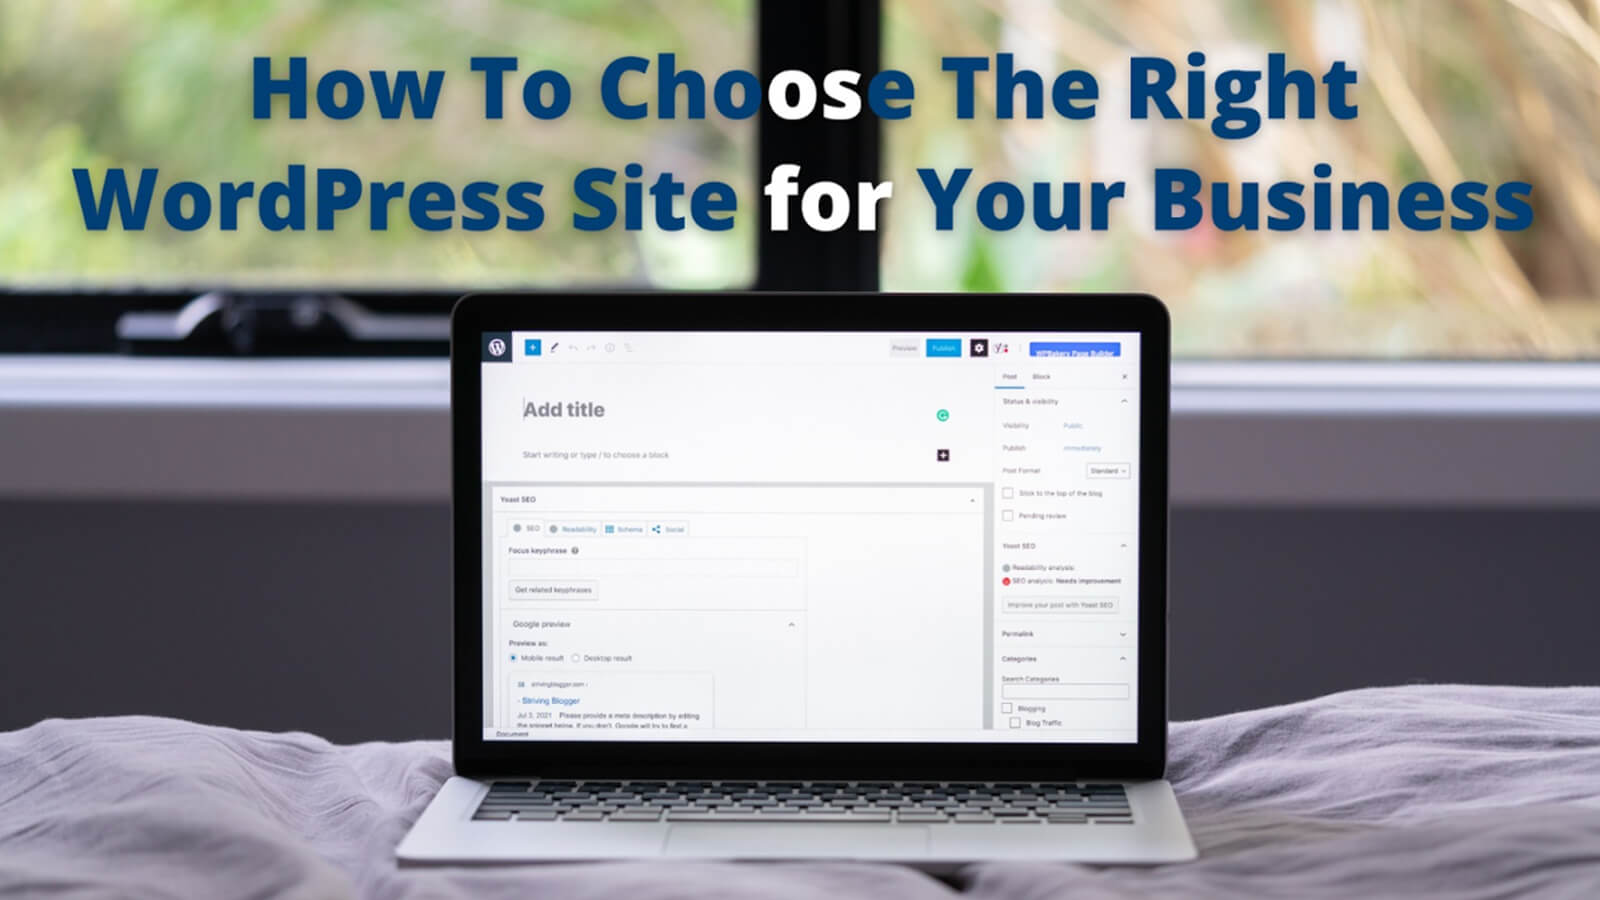 How to Choose the Right WordPress Site for Business